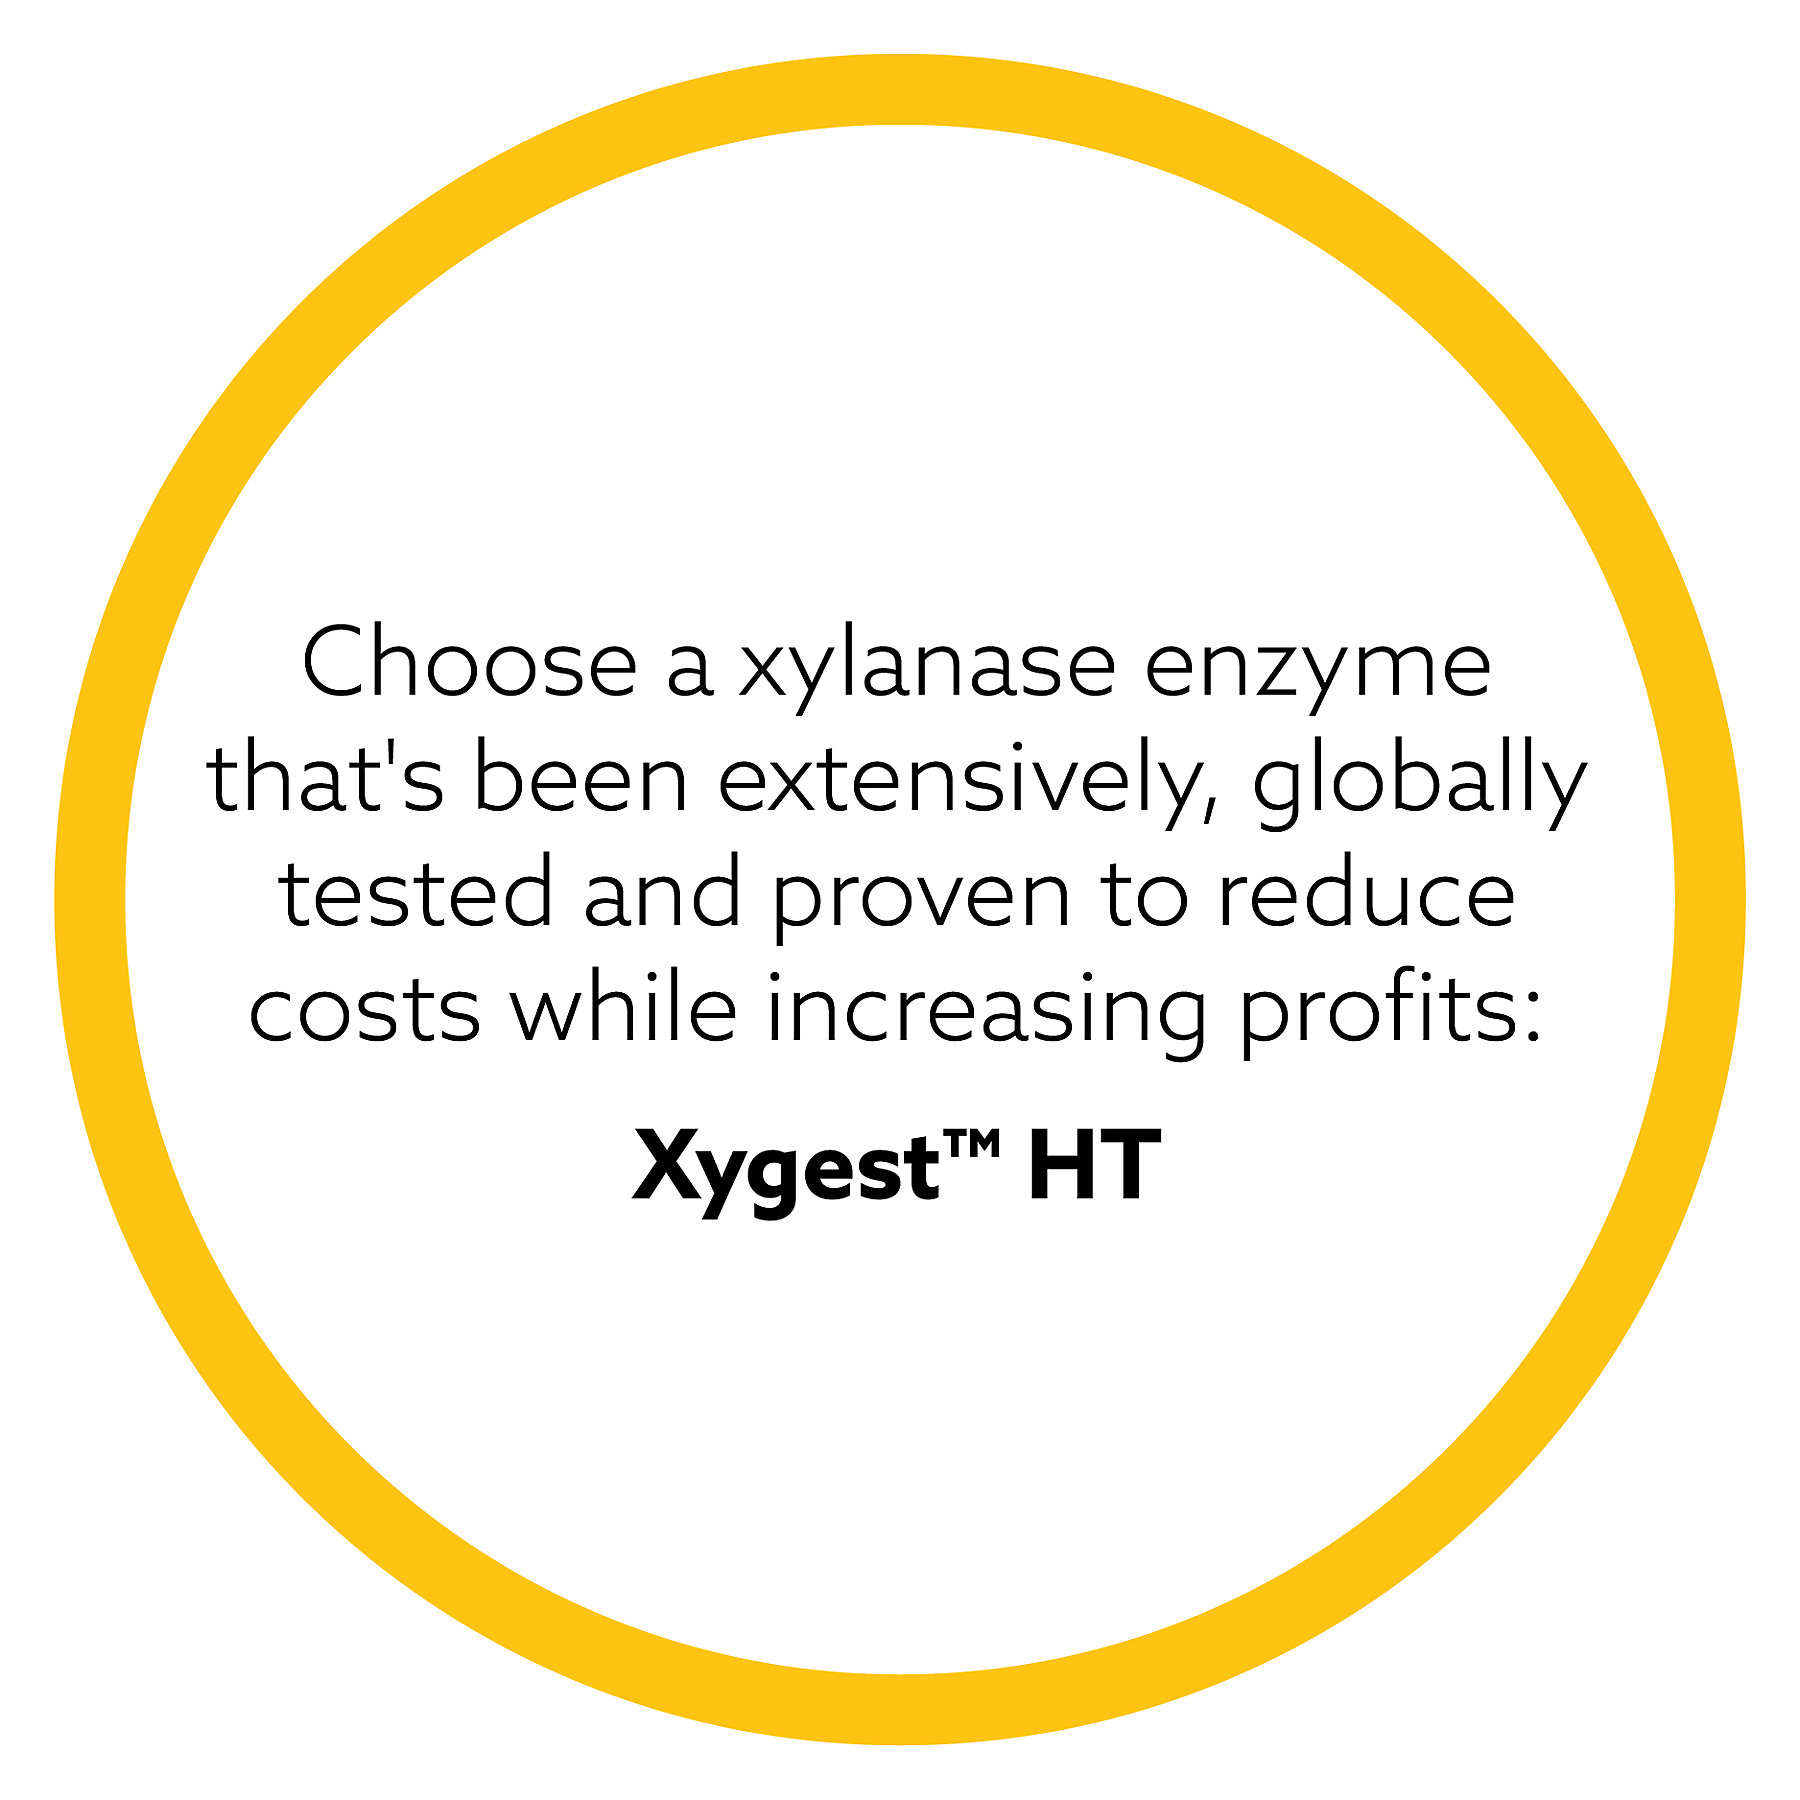 XYGEST HT graphs and images